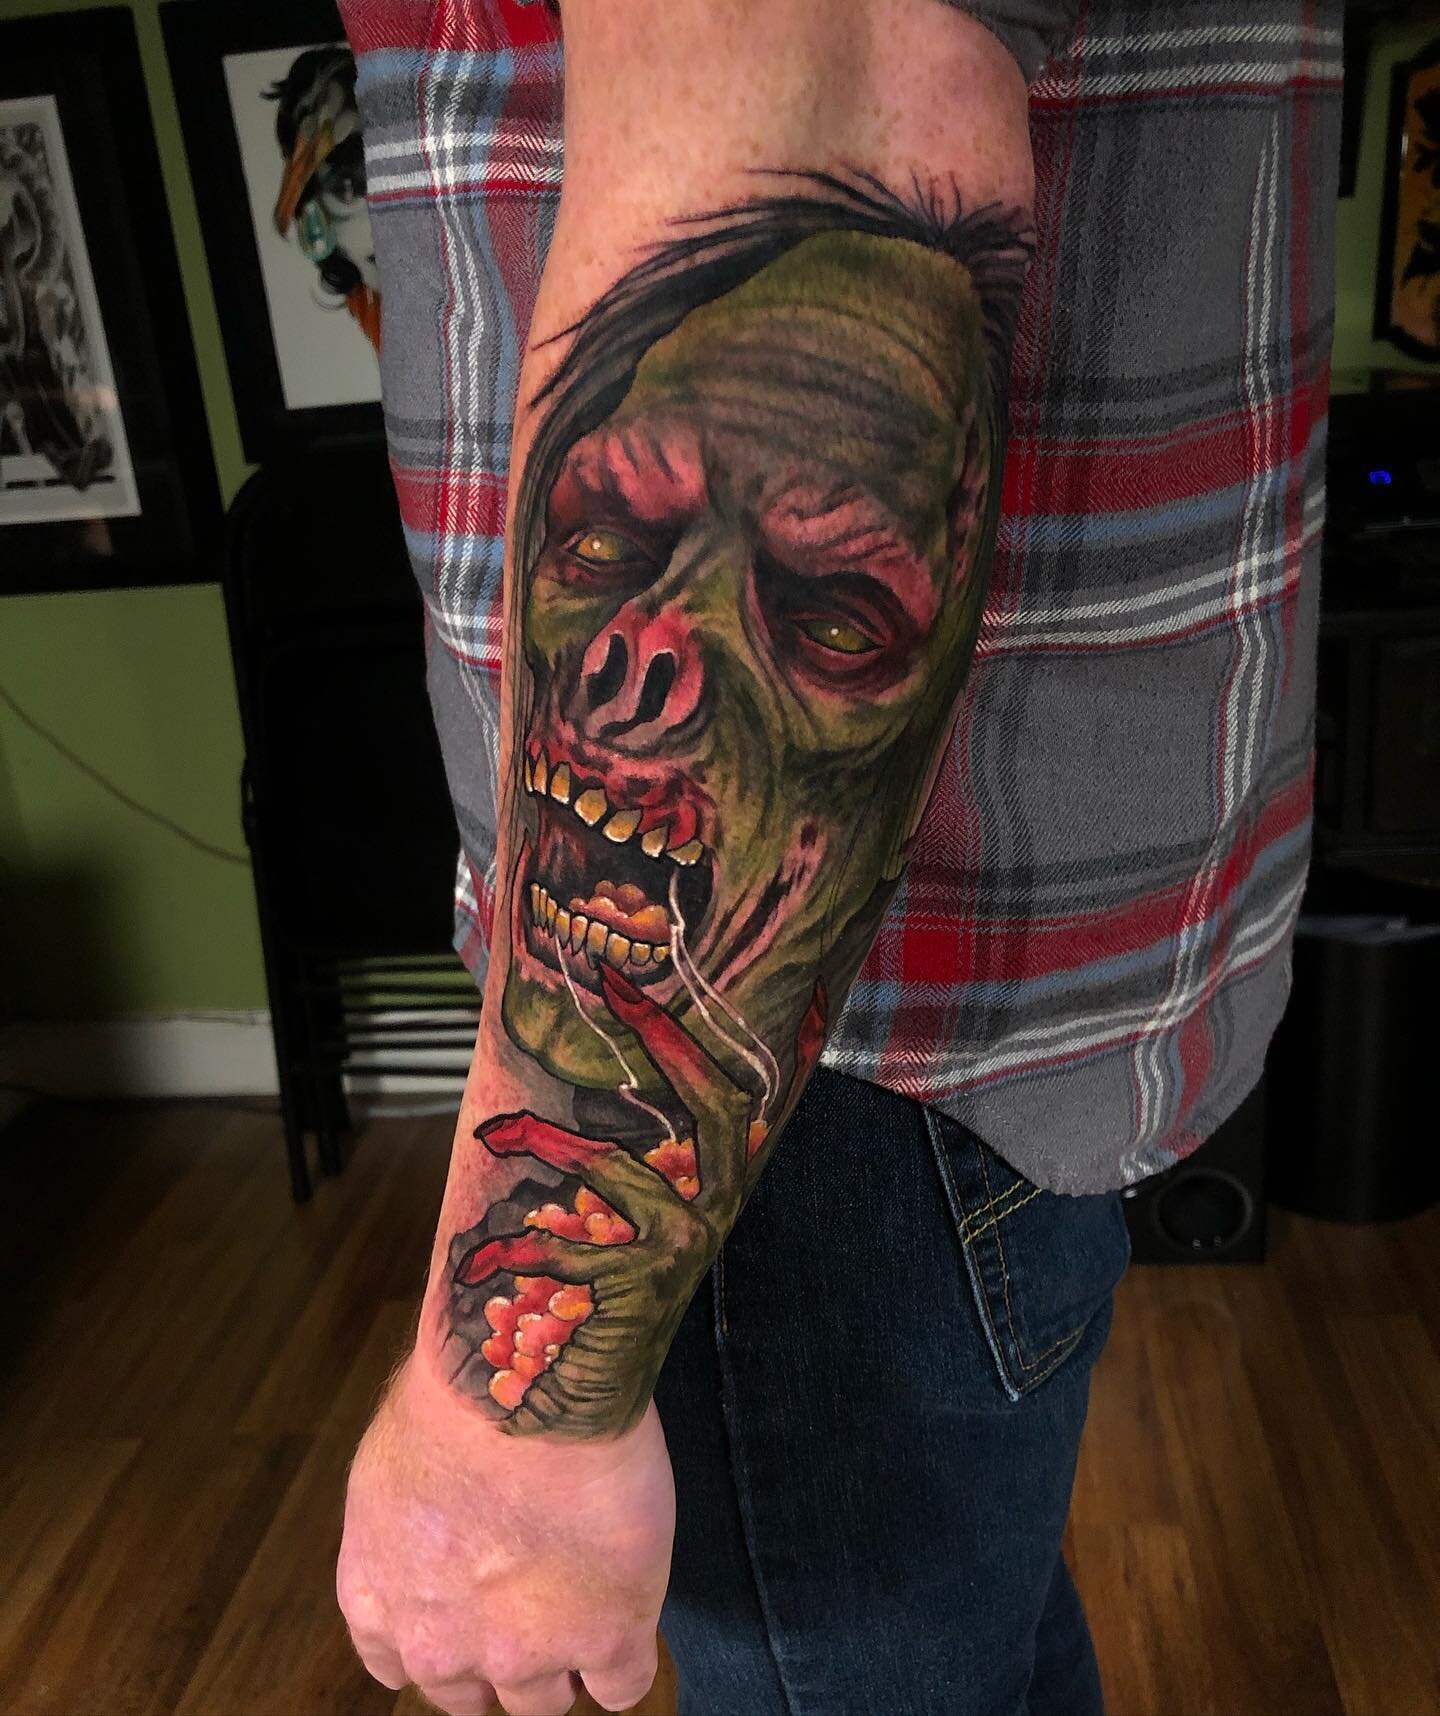 Zombie getting some brain 🧟&zwj;♂️ Thanks again, Grant! Stoked to work more on this arm soon. 
&bull;
To book an appointment, hit the link in my bio 🎉 or email me directly to t_burtz@yahoo.com
&bull;
&bull;
&bull;
&bull;
#missinglinktattoo #support